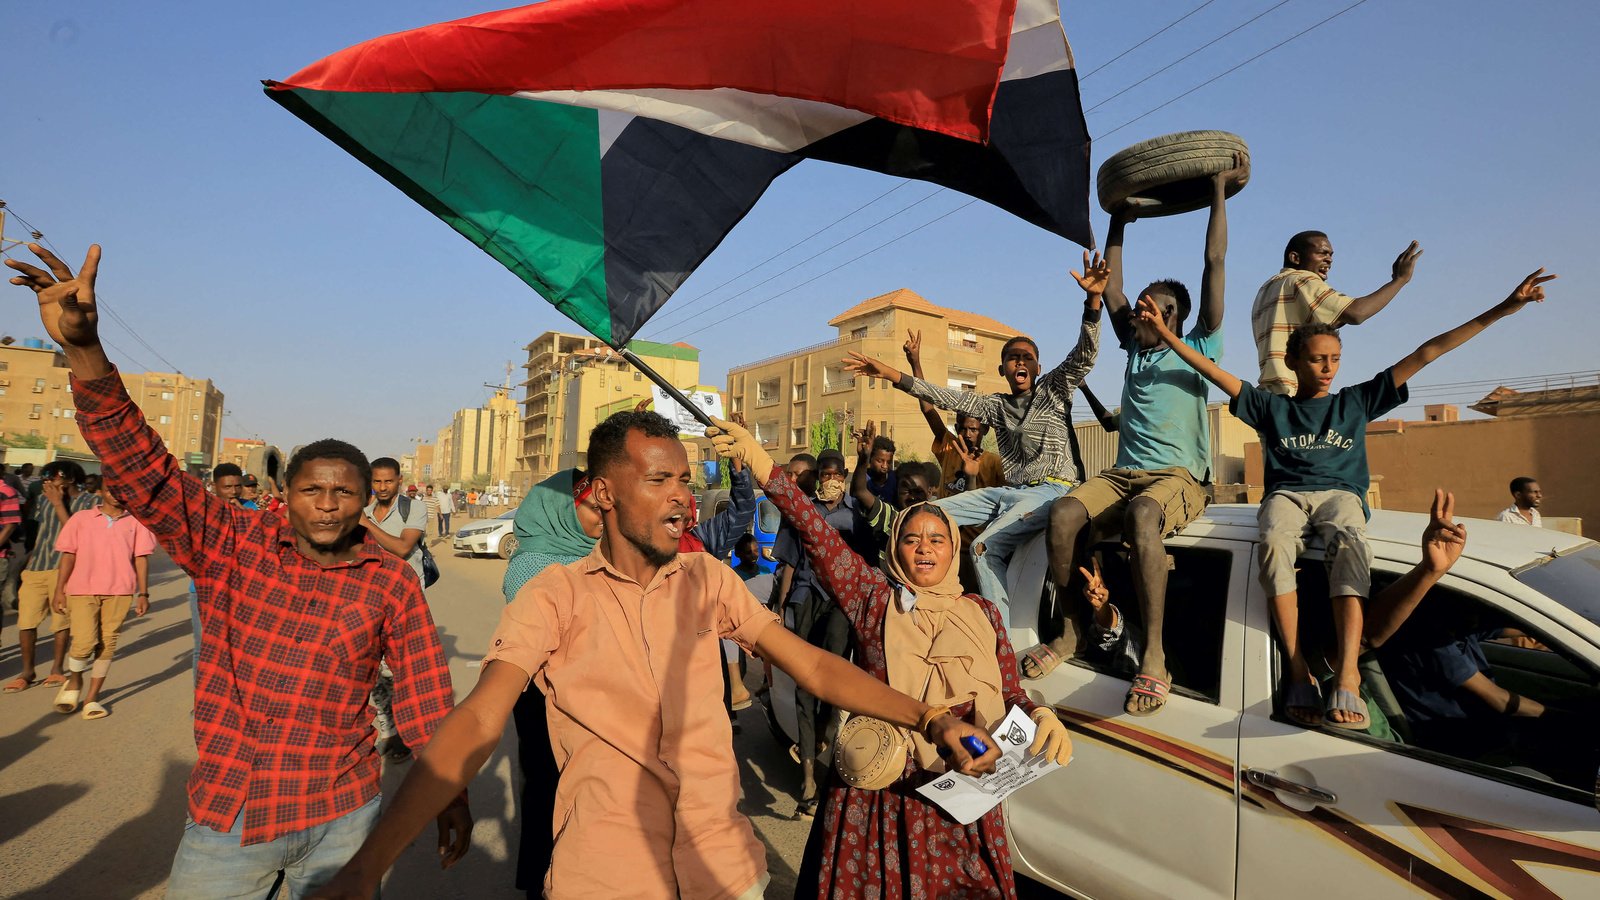 Security Infighting Drives Delays in Sudan | Council on Foreign Relations